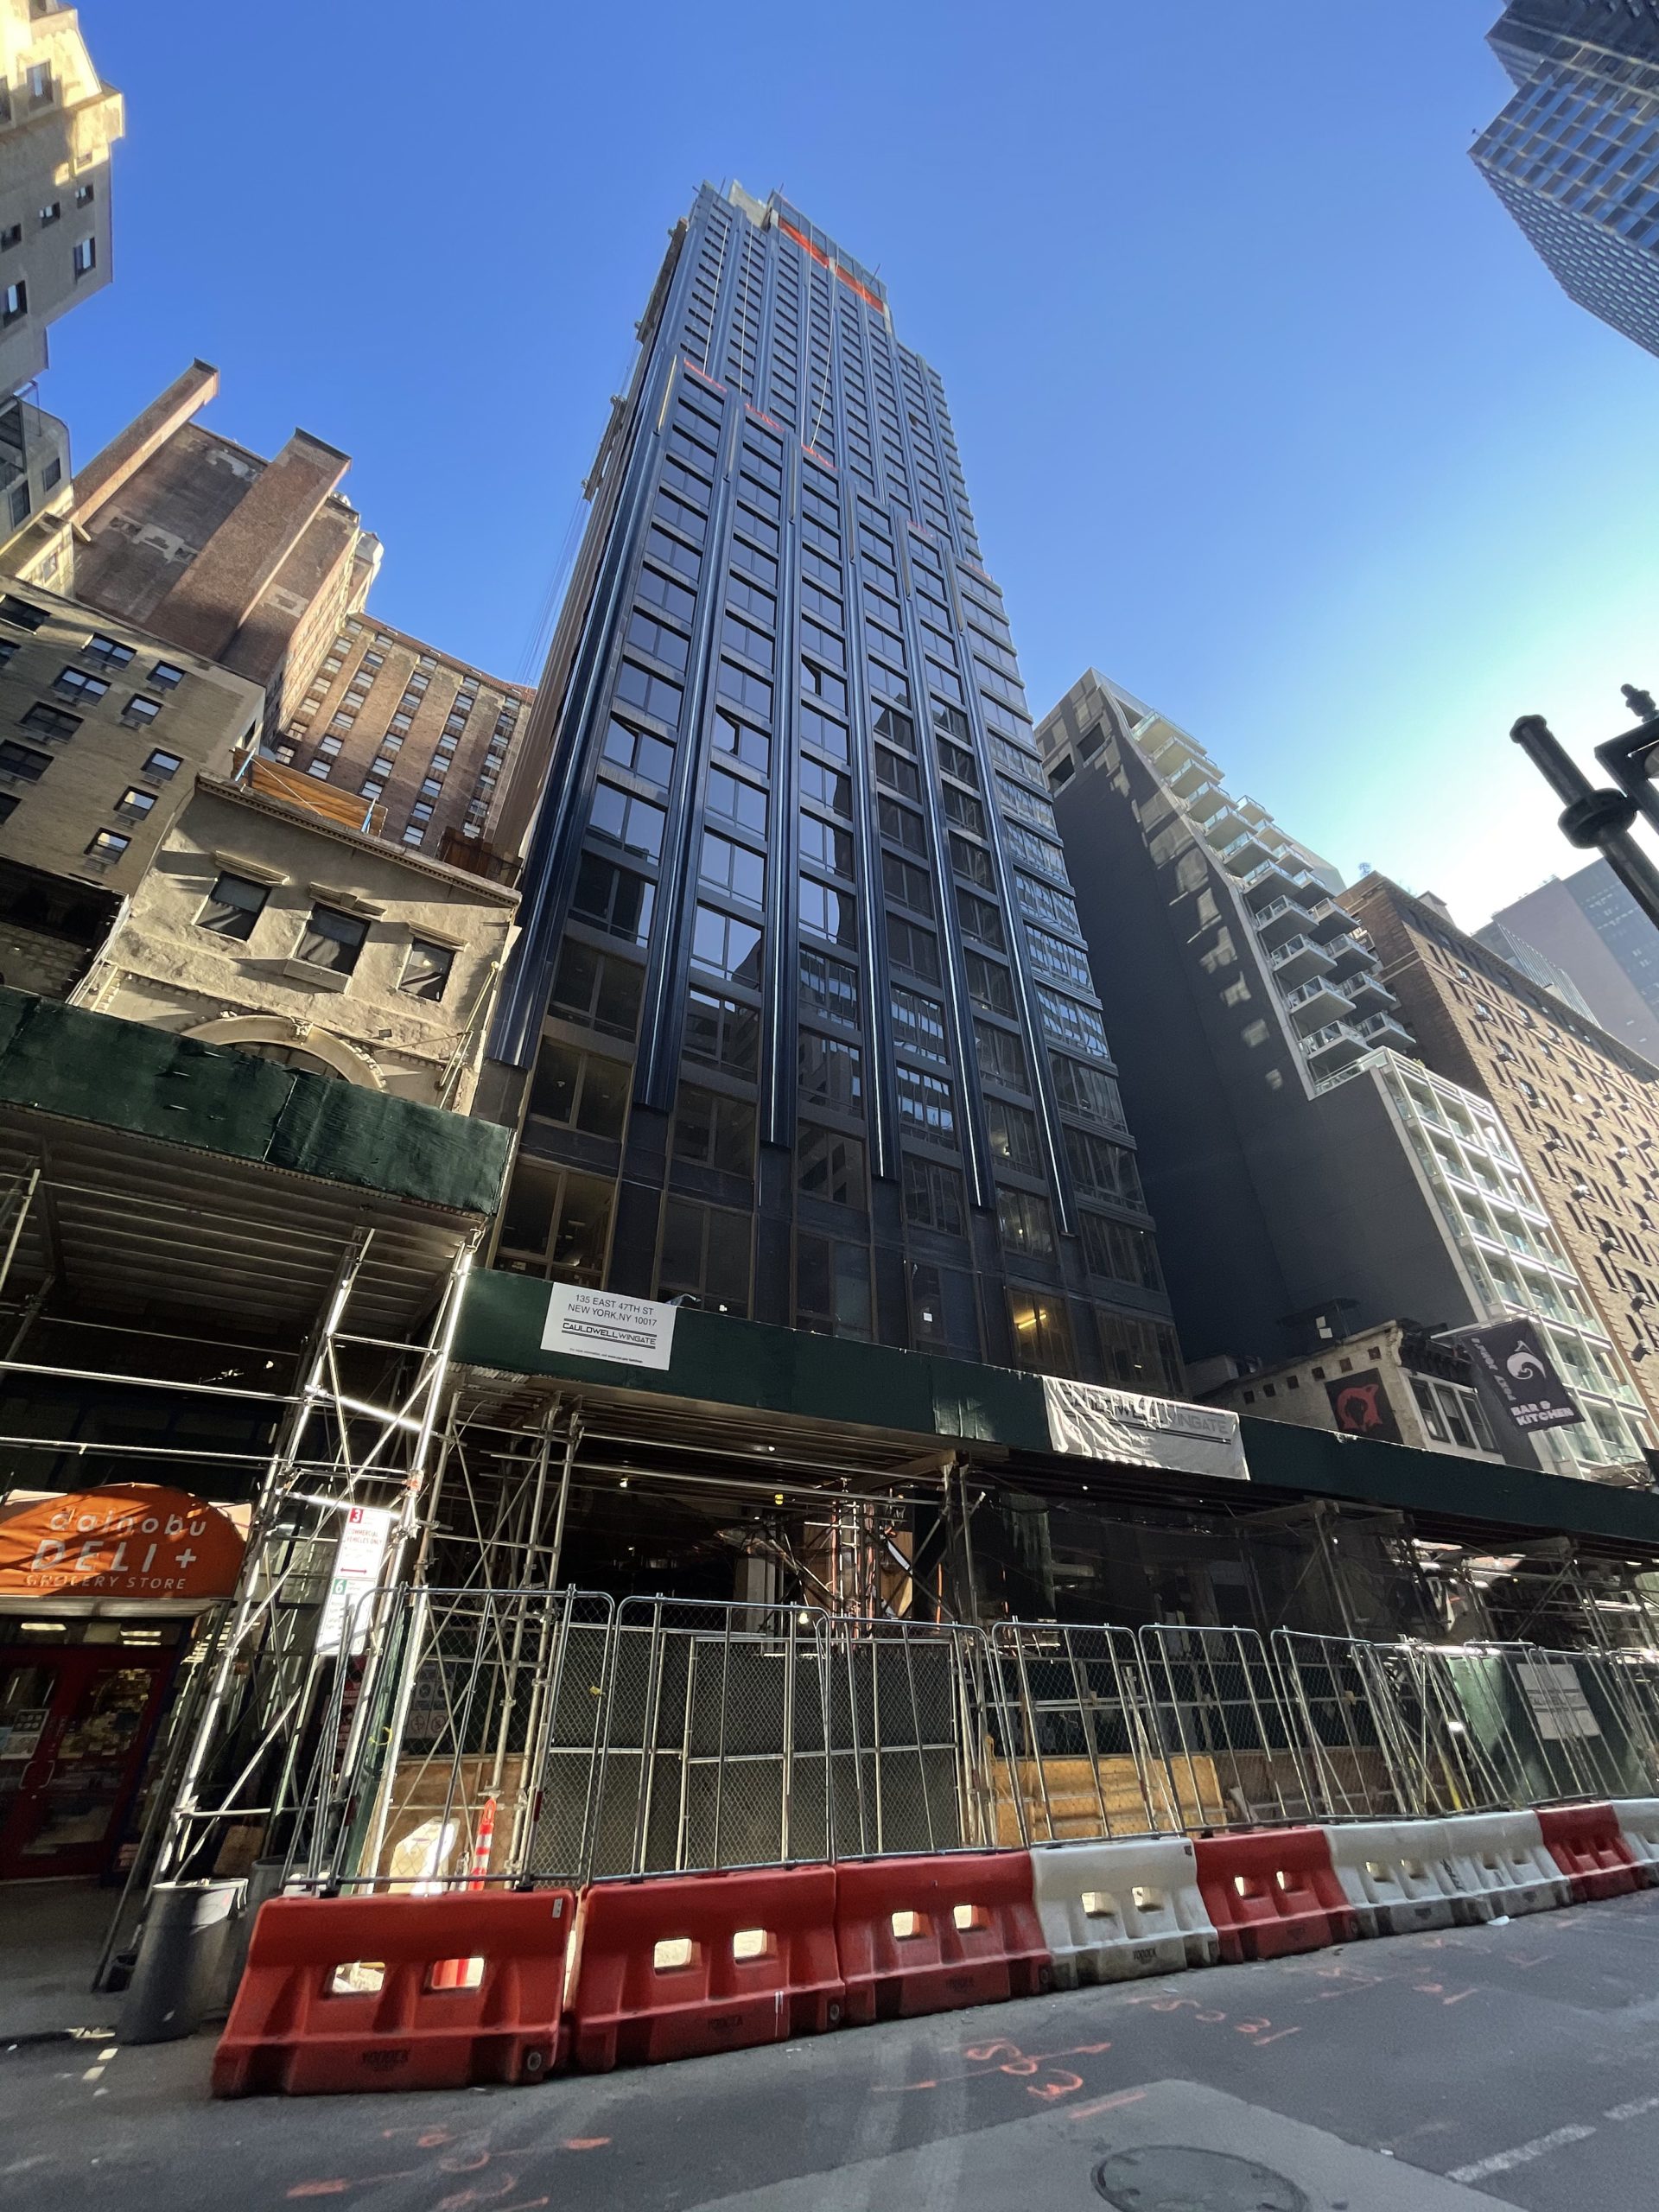 New York Architecture Photos: 135 East 57th Street